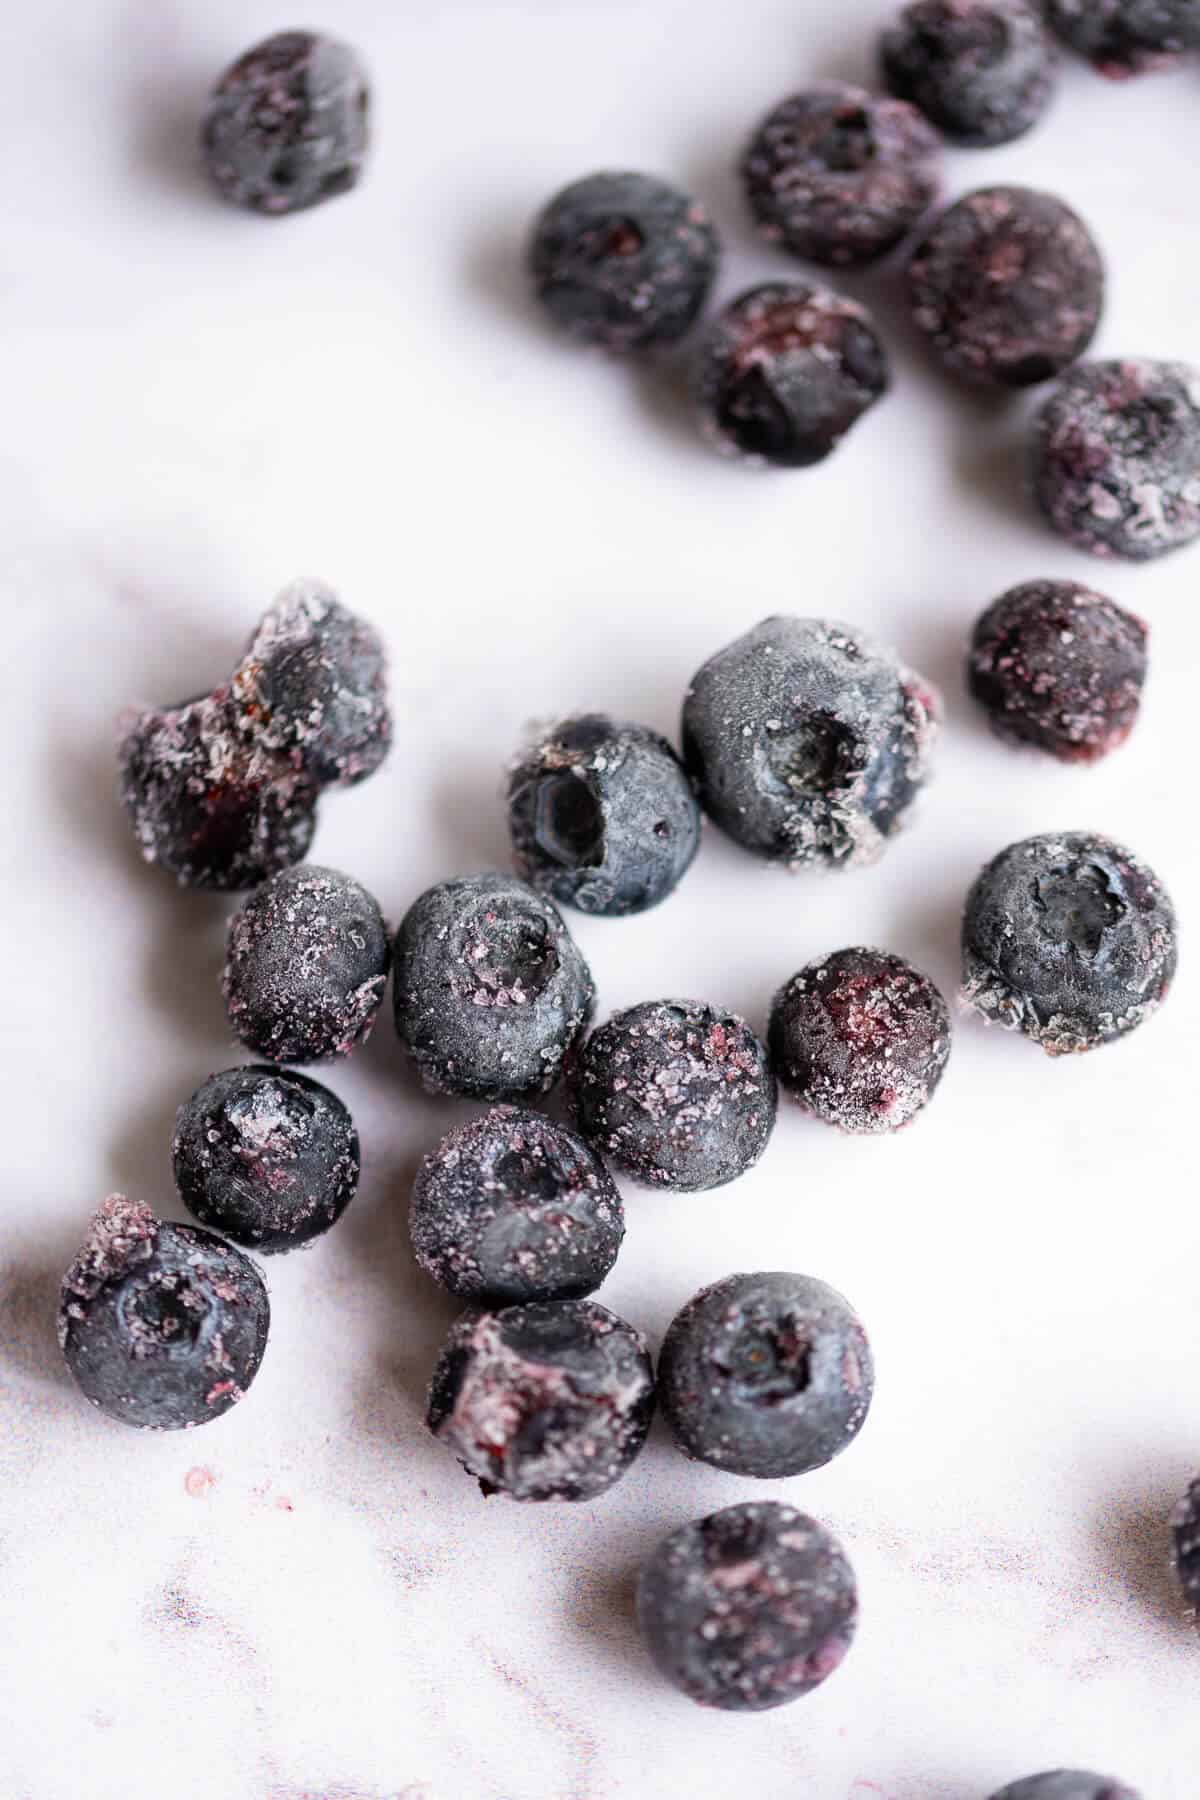 A group of frozen blueberries on a marble countertop.